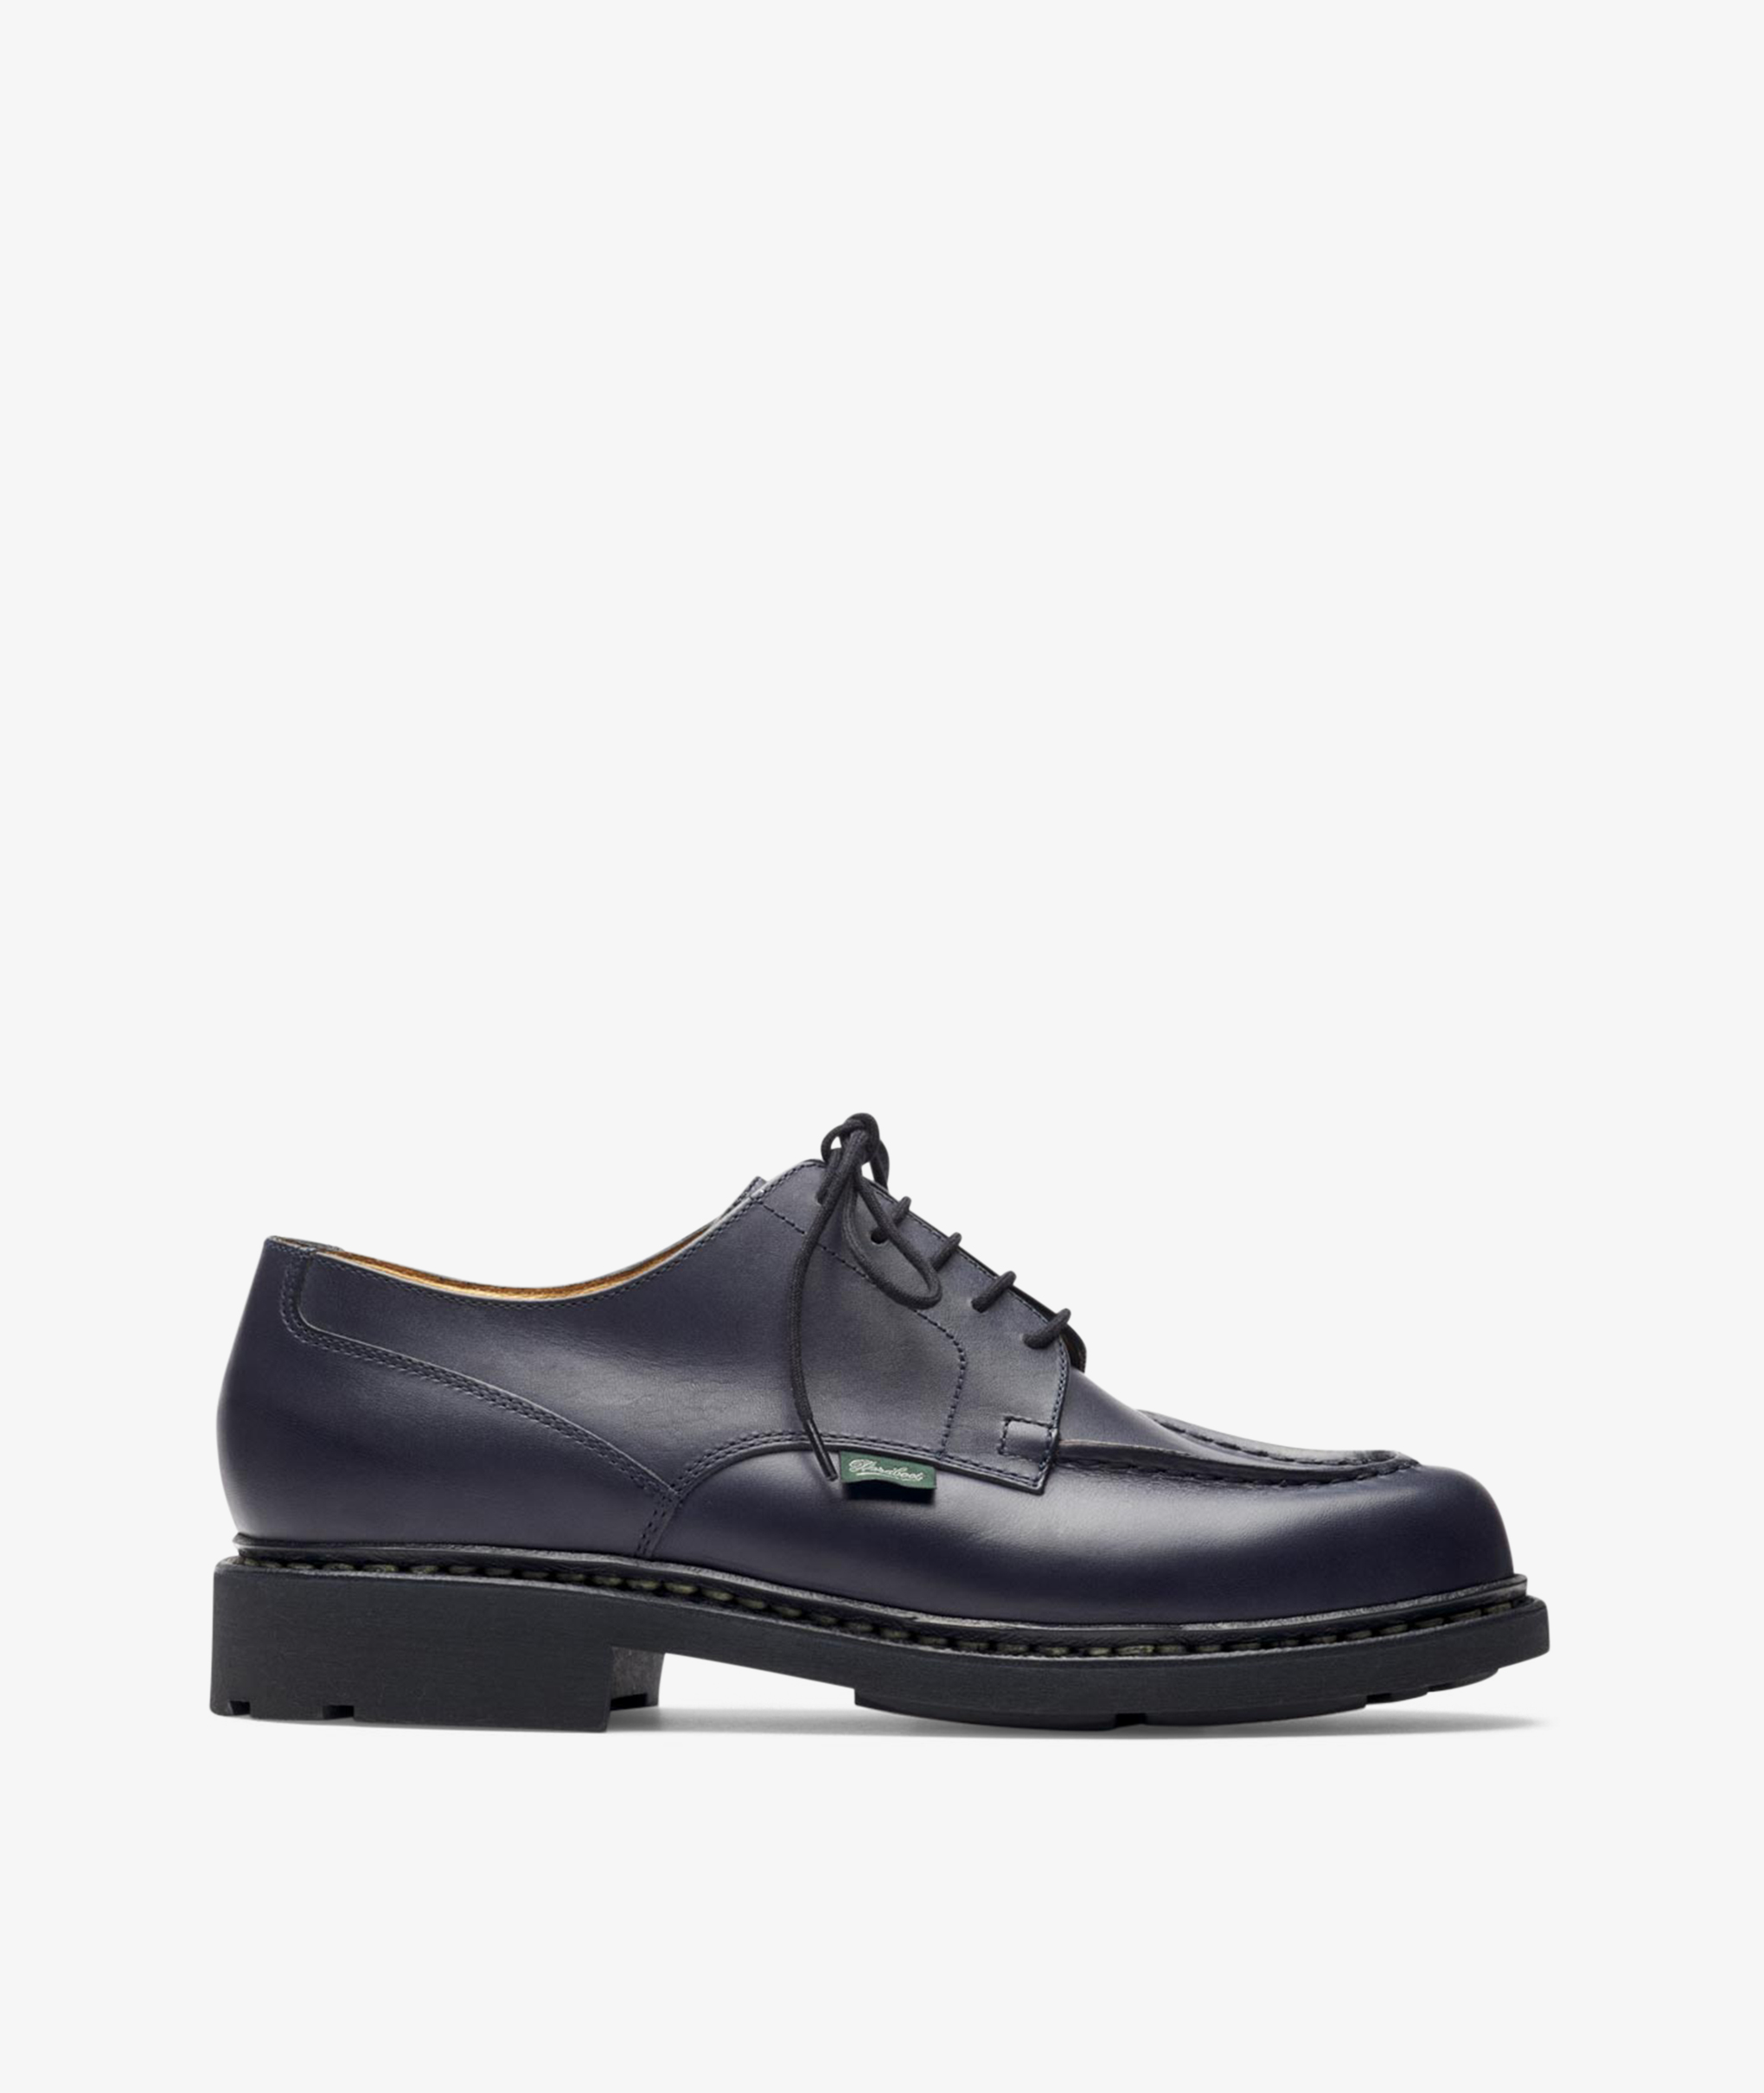 Norse Store | Shipping Worldwide - Paraboot Chambord/Tex - Navy